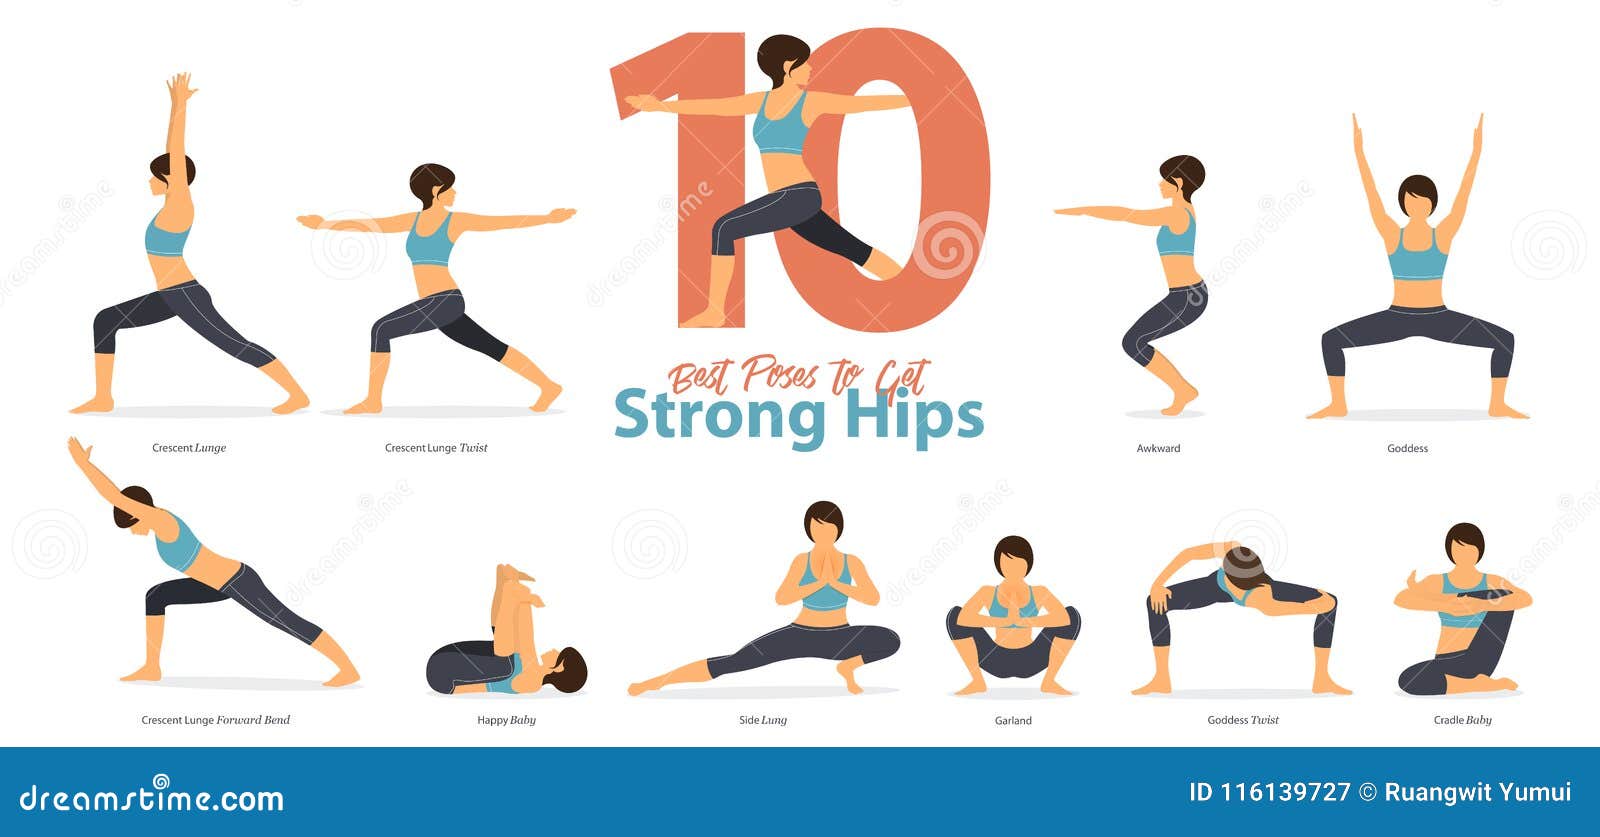 a set of yoga postures female figures for infographic 10 yoga poses for get strong hips in flat .